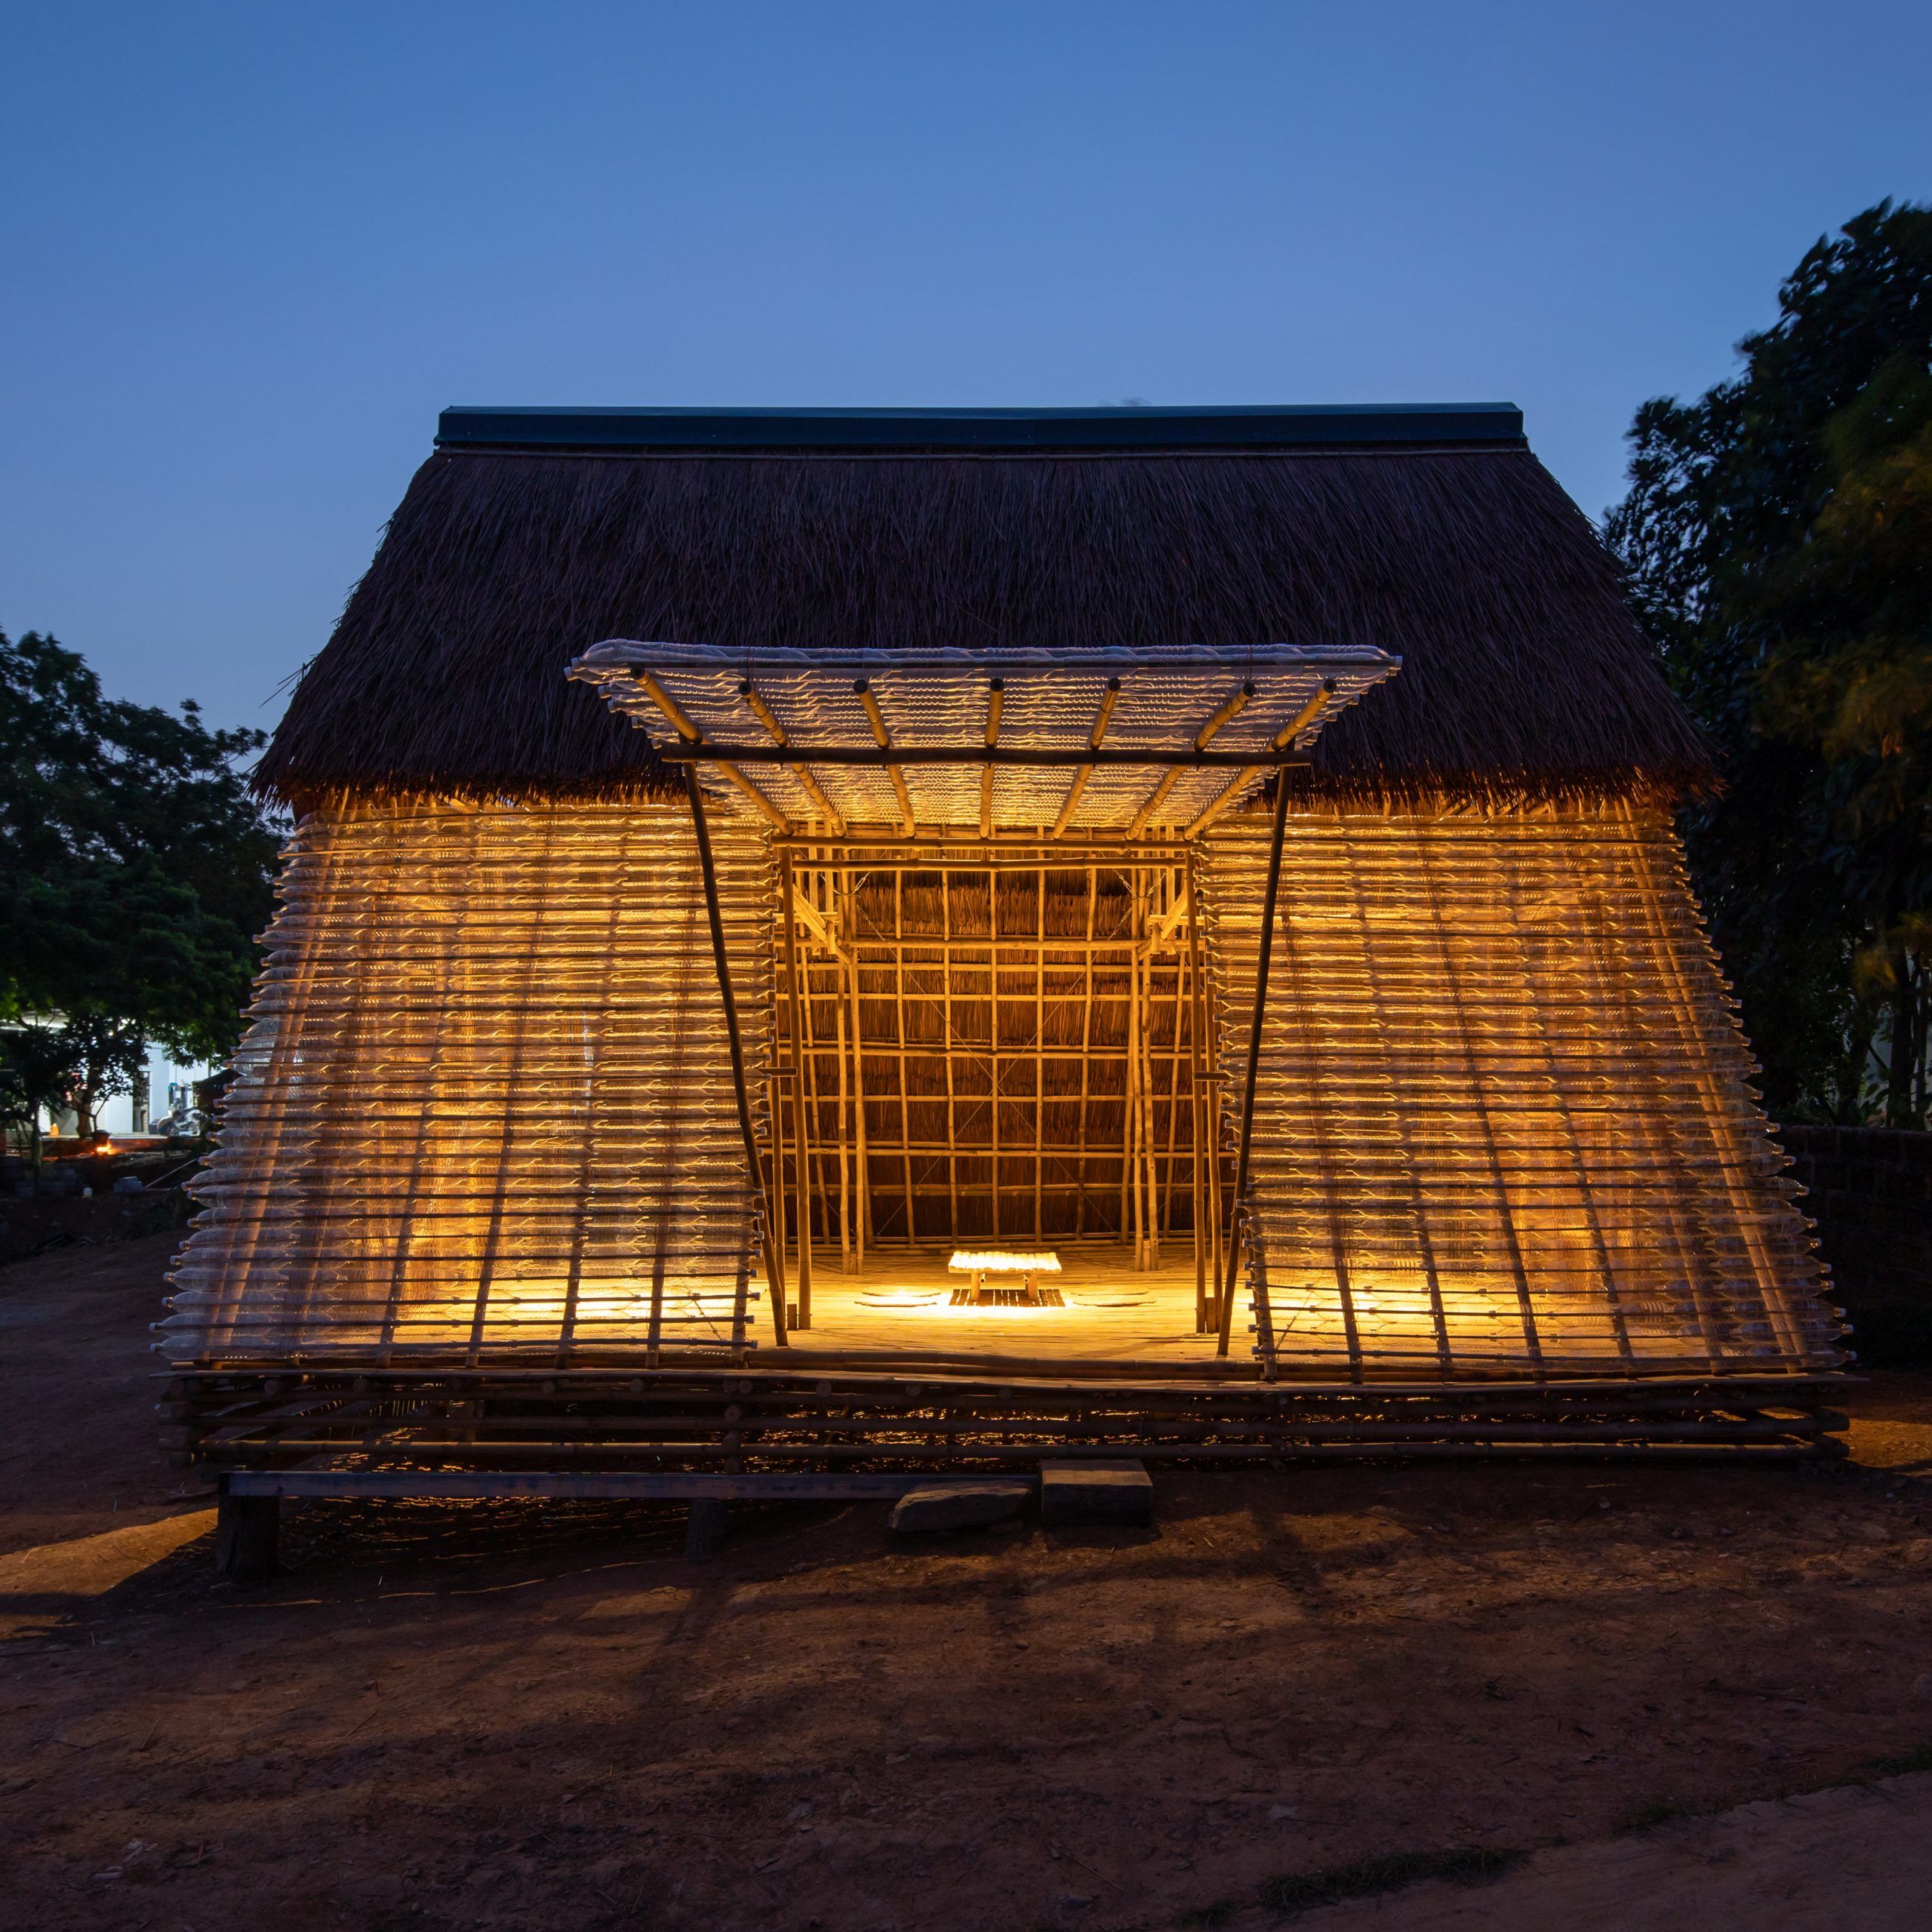 kienviet Nha tre noi–Mau nha danh cho nguoi dan vung song nuoc Viet Nam H and P Architects 22 5 scaled